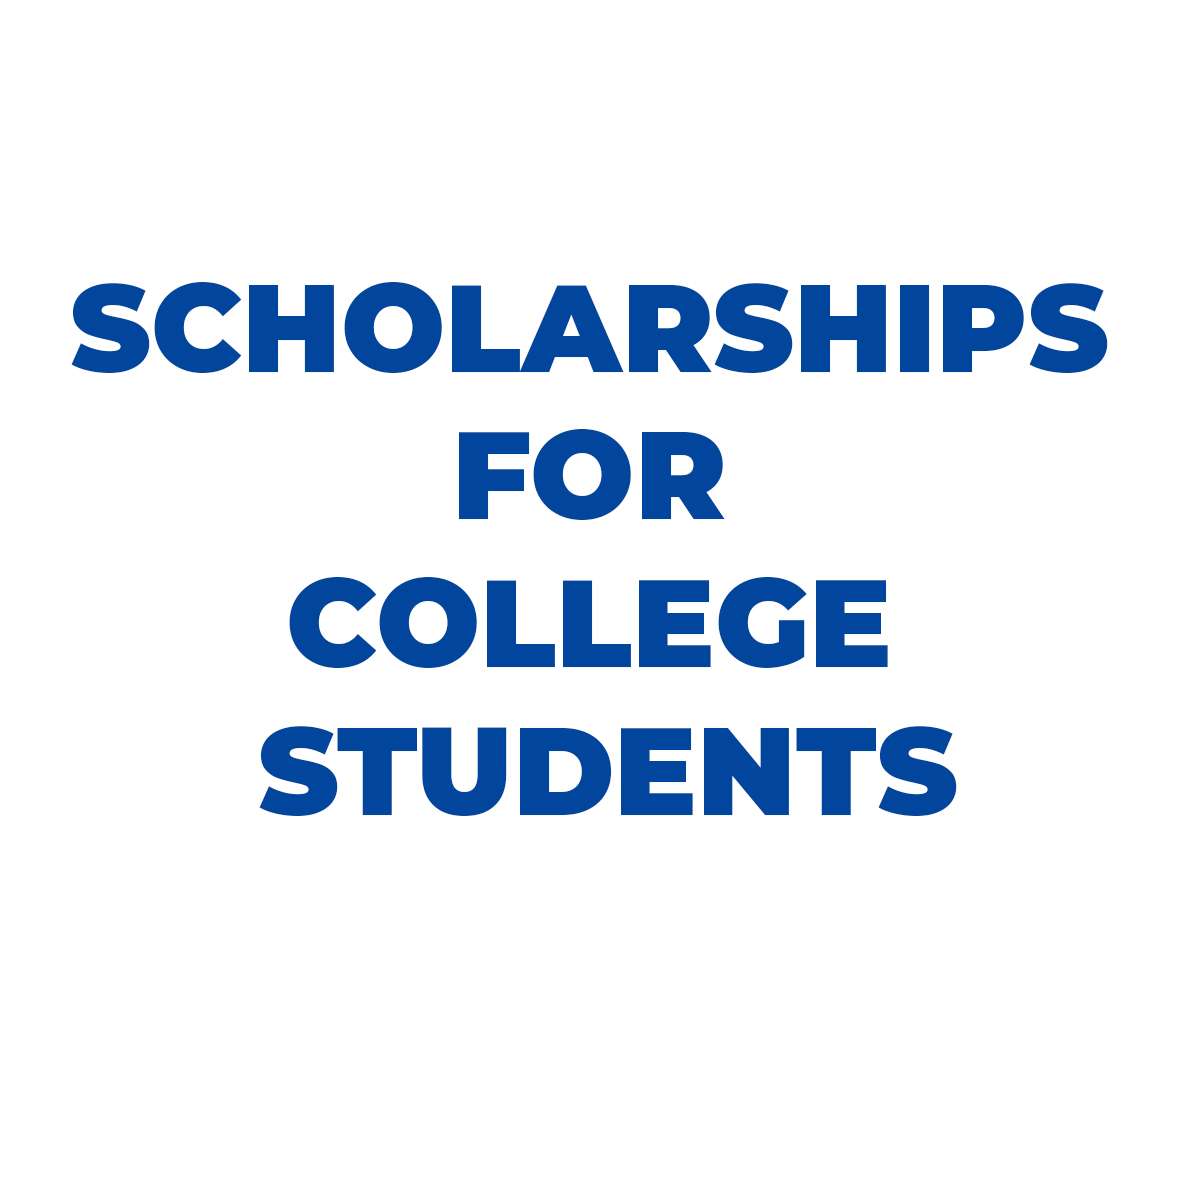 The Ultimate Guide to Finding Scholarships for College Students